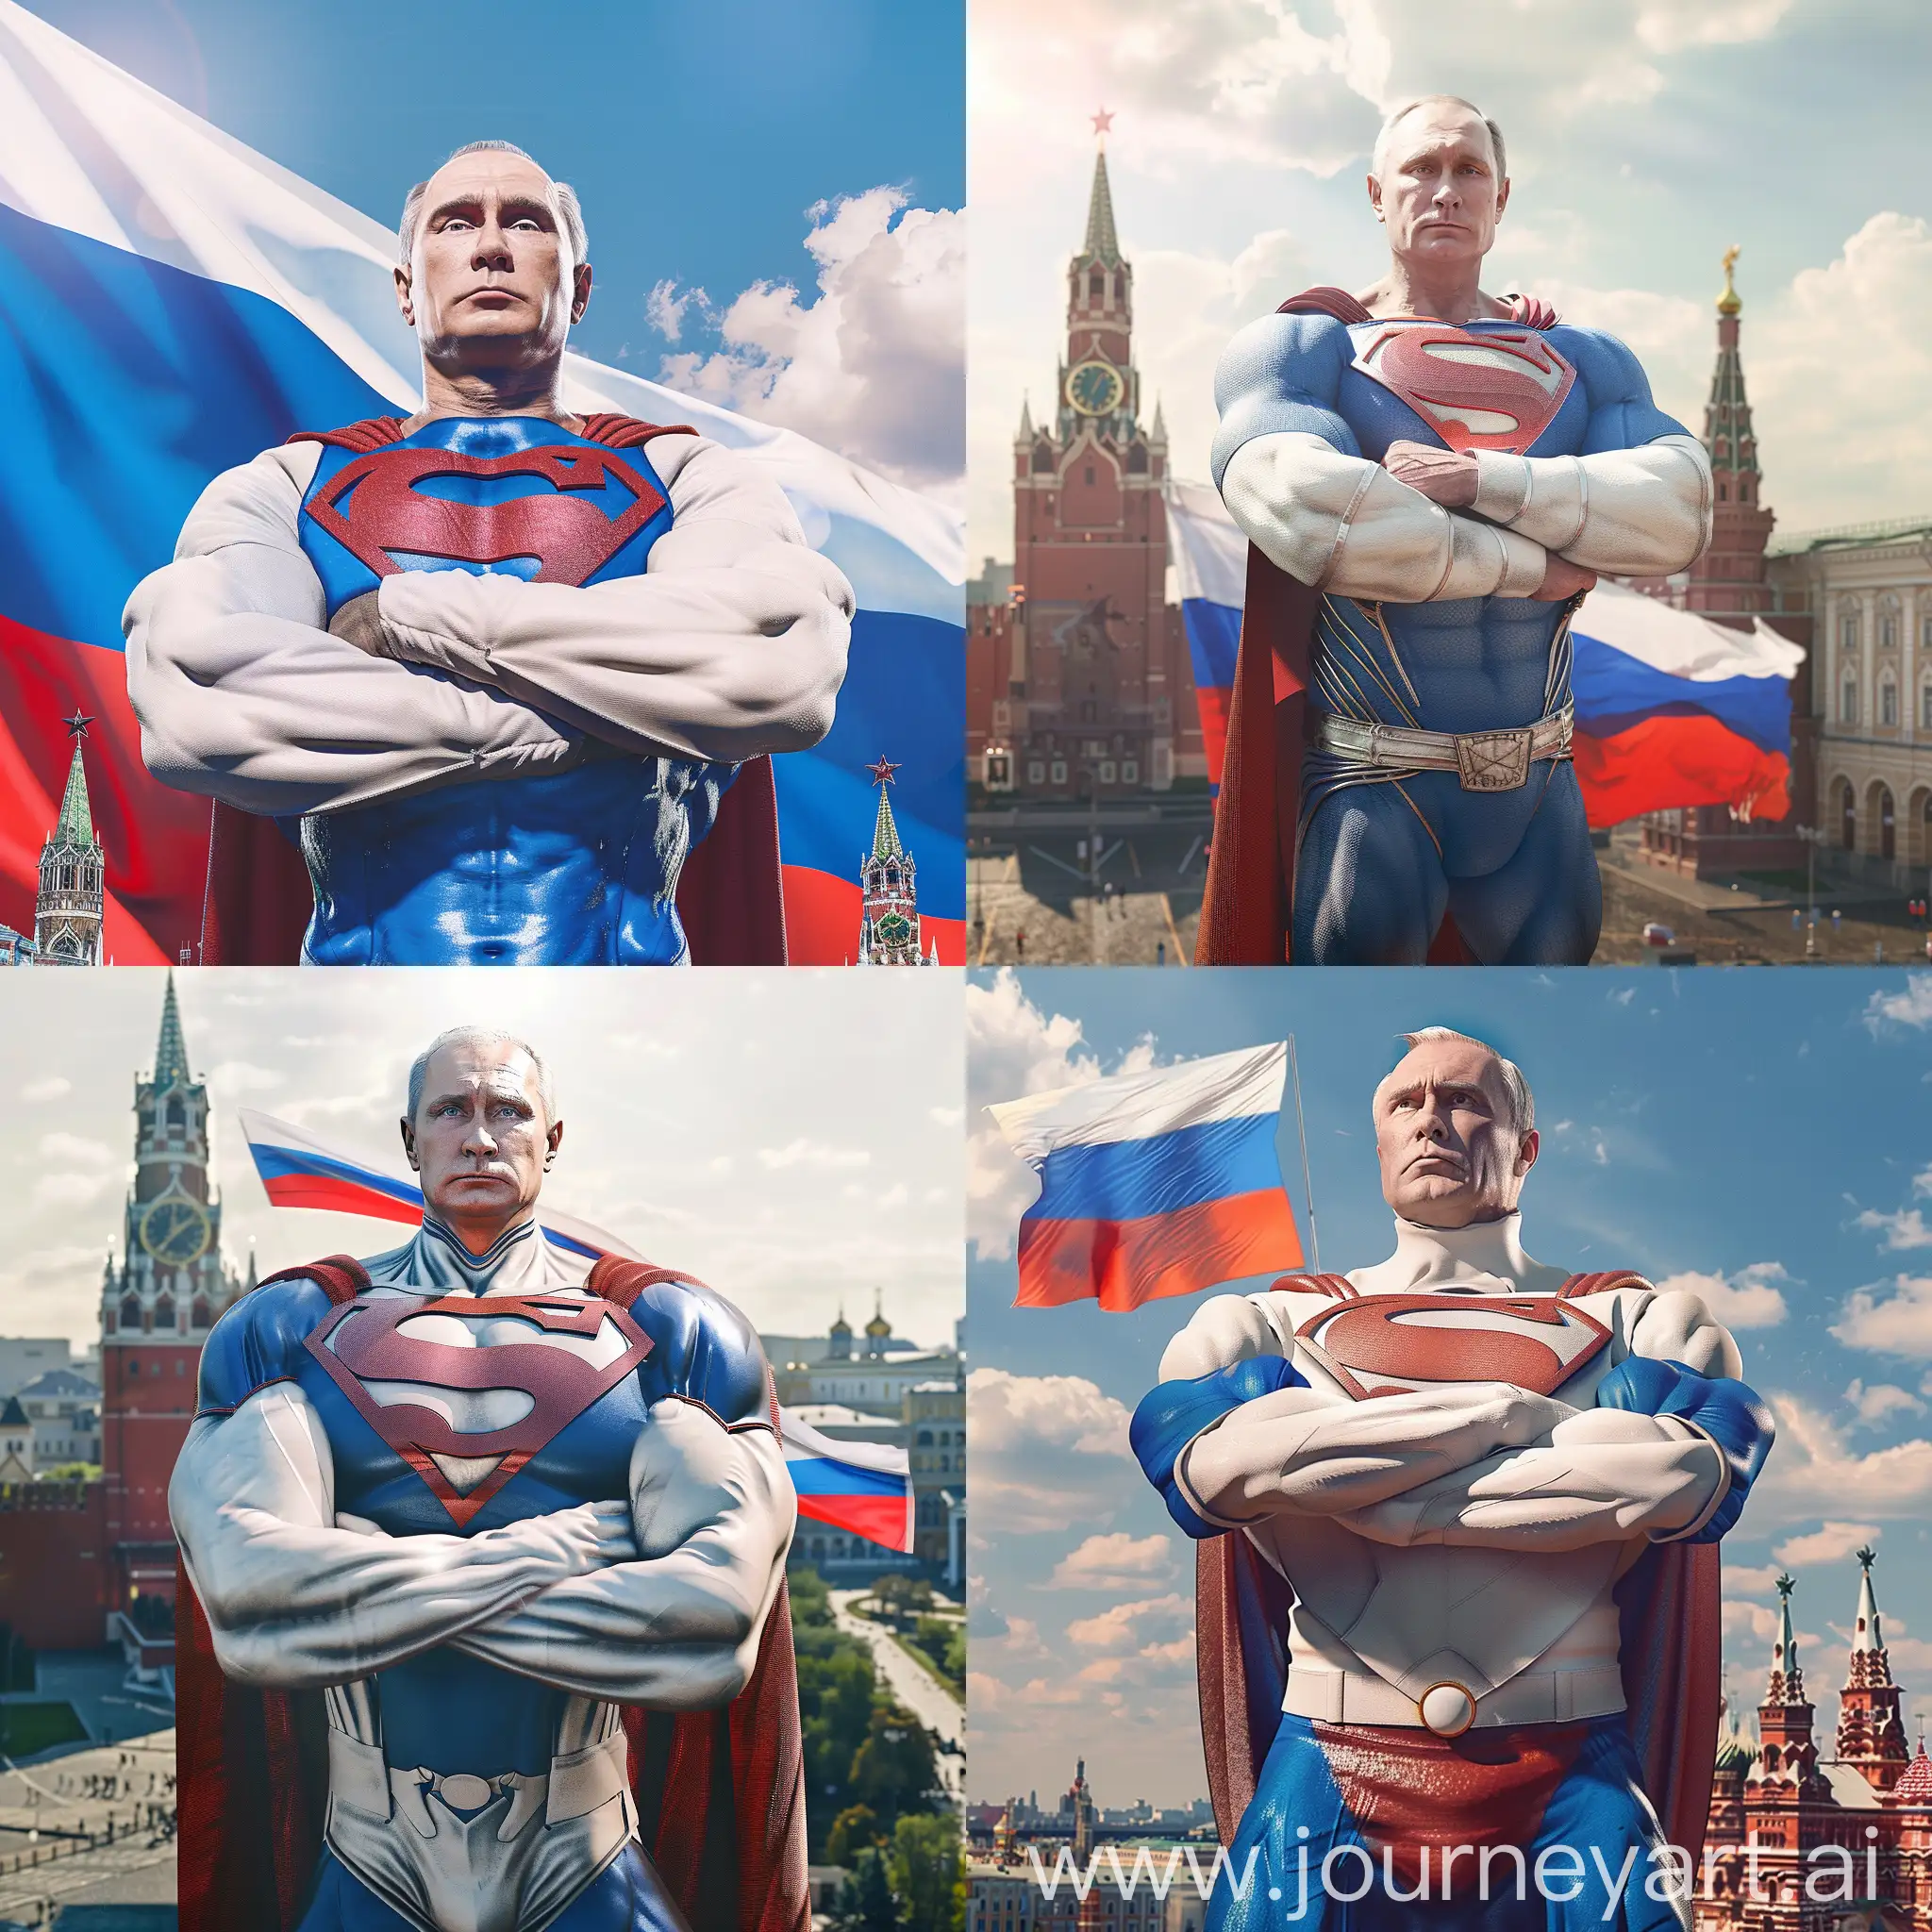 Strong-Vladimir-Putin-as-Superman-in-Iconic-Red-Square